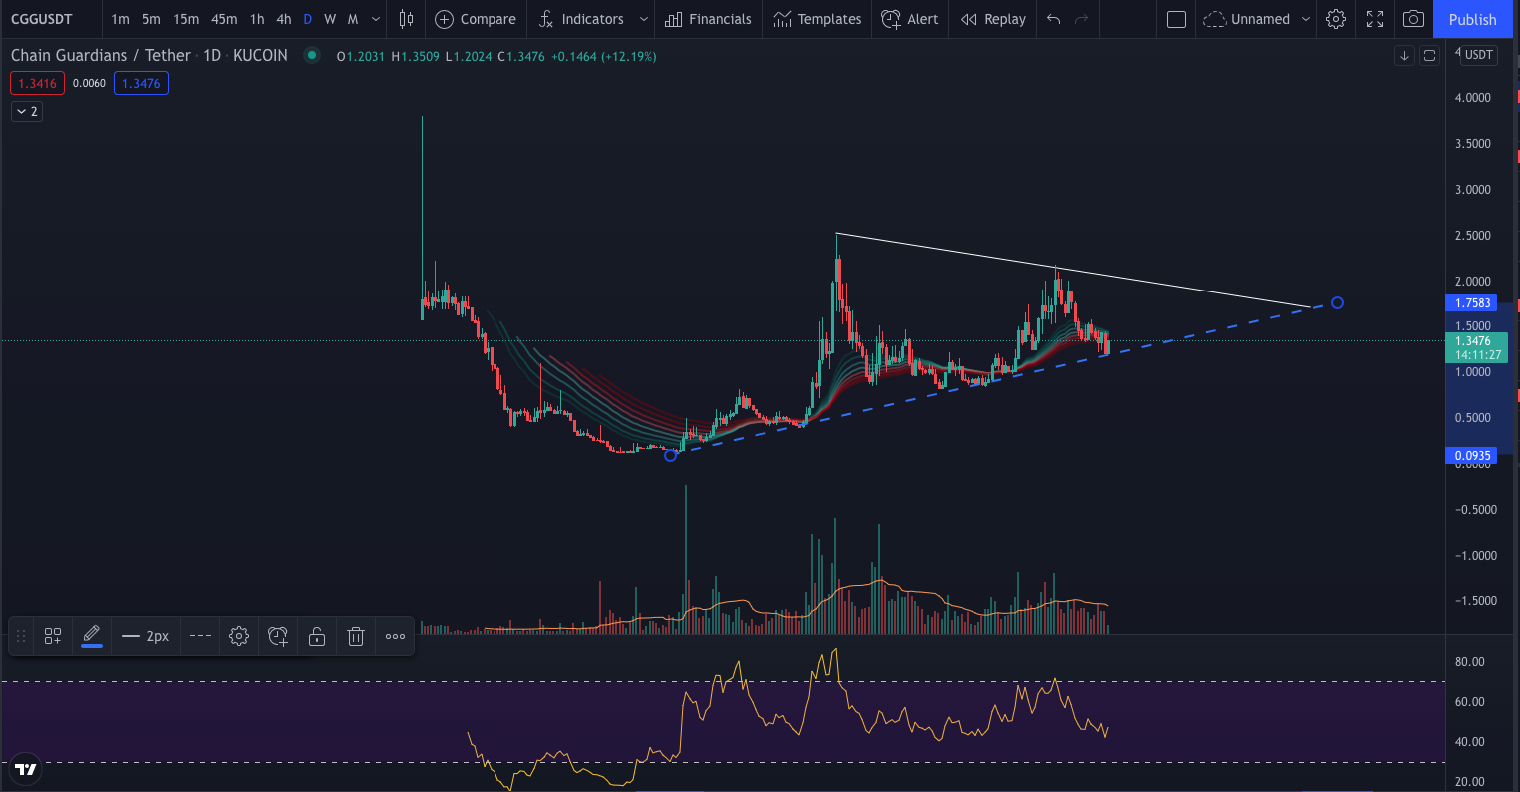 Chain Guardians coin price technical analysis chartChain Guardians coin price technical analysis chart